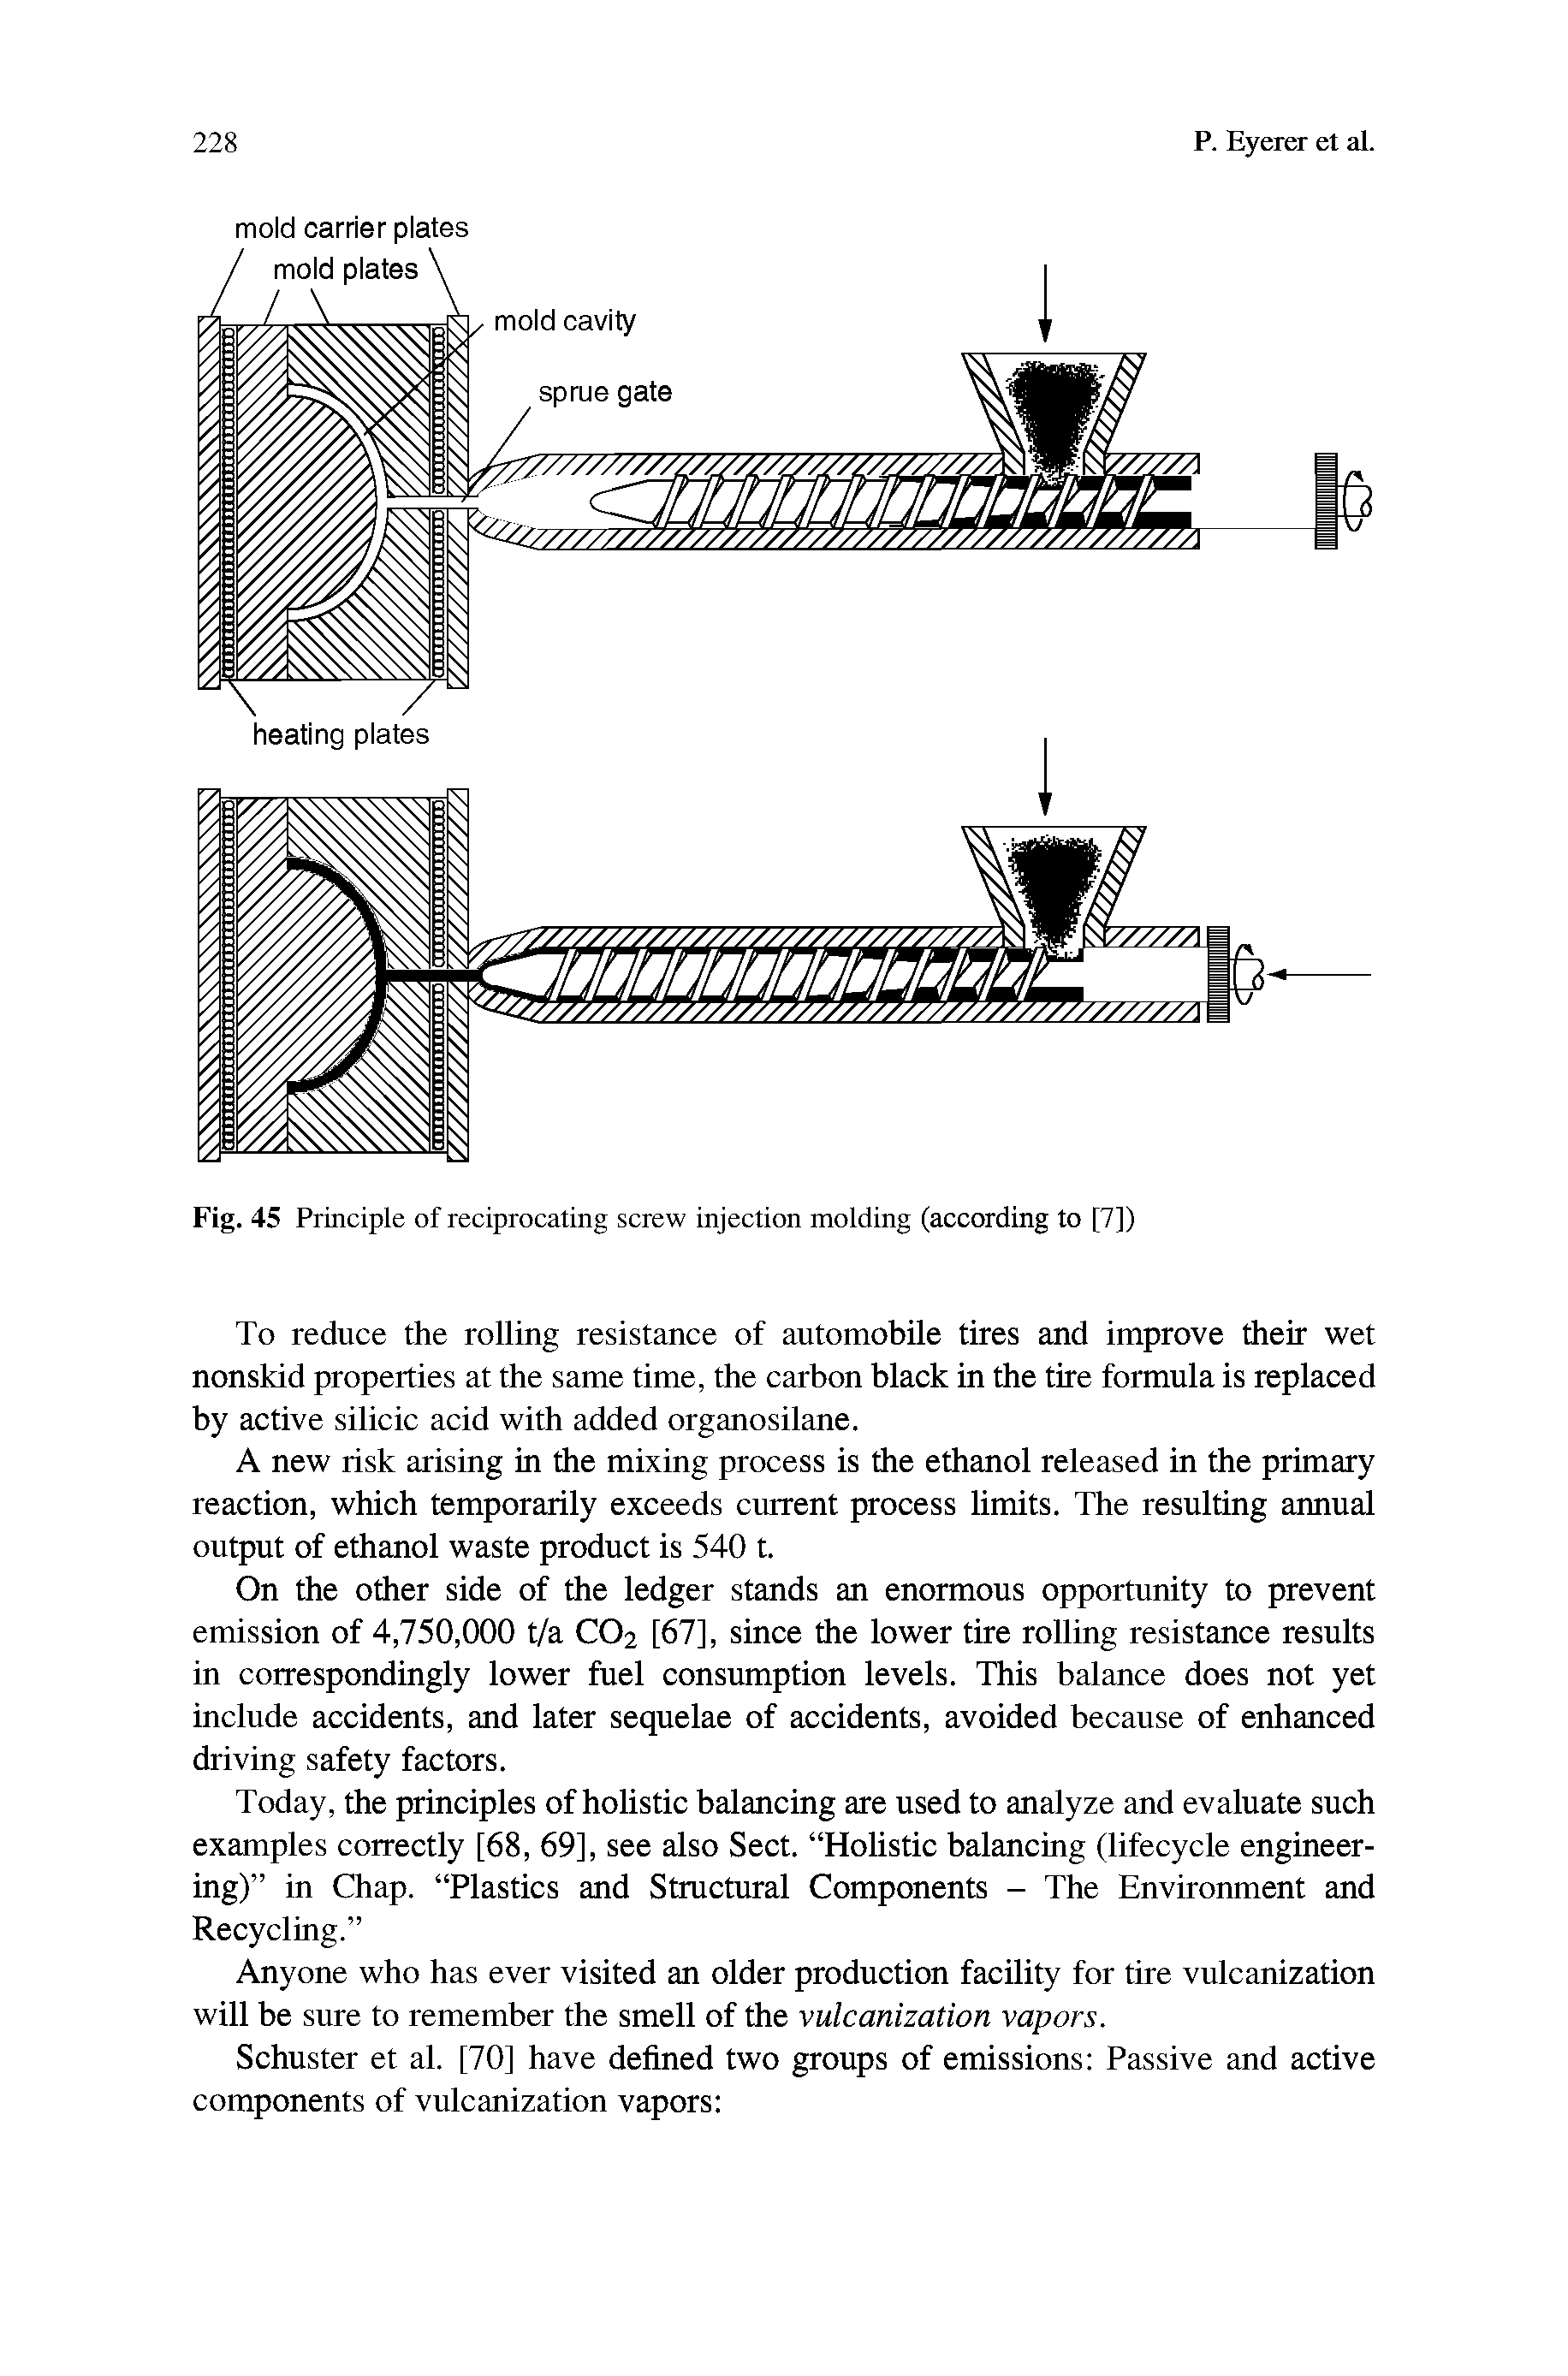 Fig. 45 Principle of reciprocating screw injection molding (according to [7])...